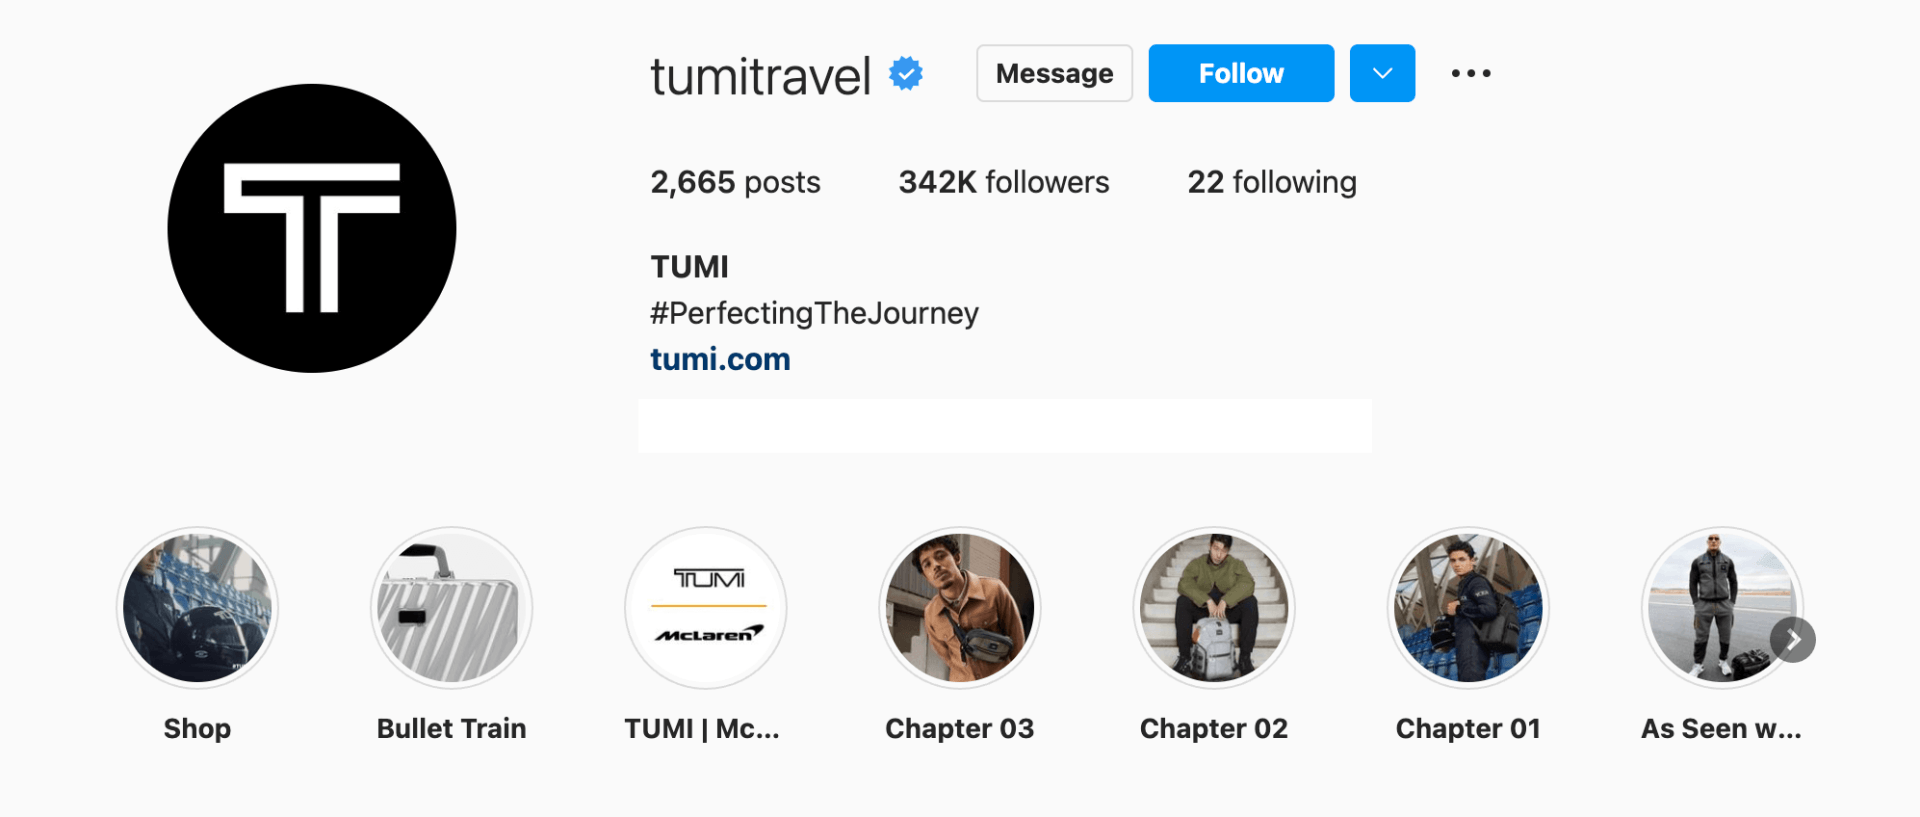 tumi instagram page with icons for various highlights of luggage brand